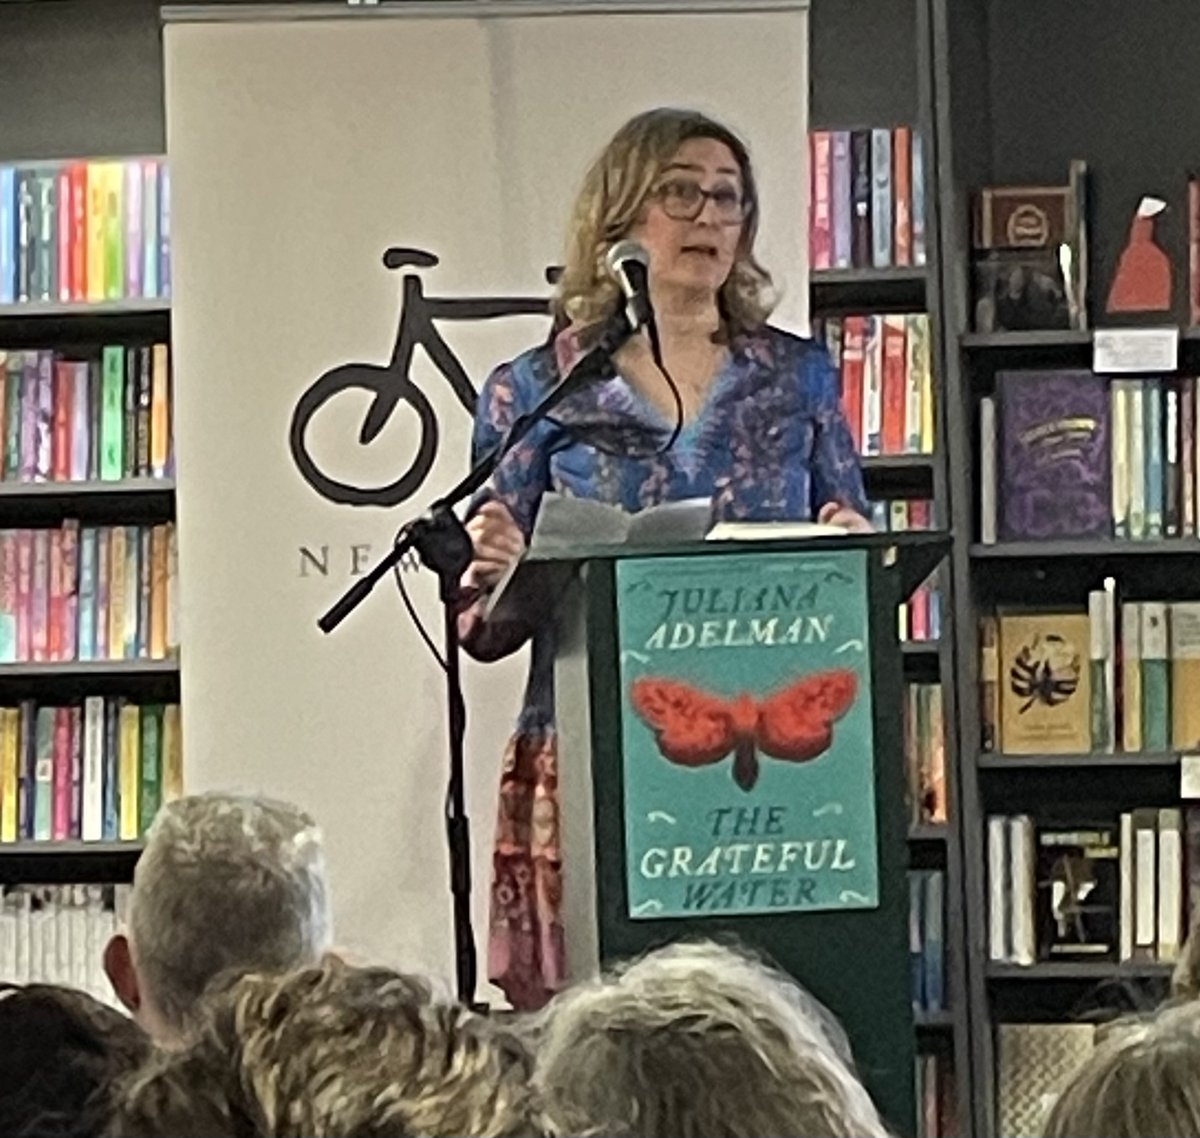 Last night, our colleague Juliana Adelman launched her first novel, The Grateful Water. It was a wonderful occasion. Earlier this week, she spoke about it to Oliver Callan. You can listen back here: rte.ie/radio/radio1/c… @DCU @NewIslandBooks